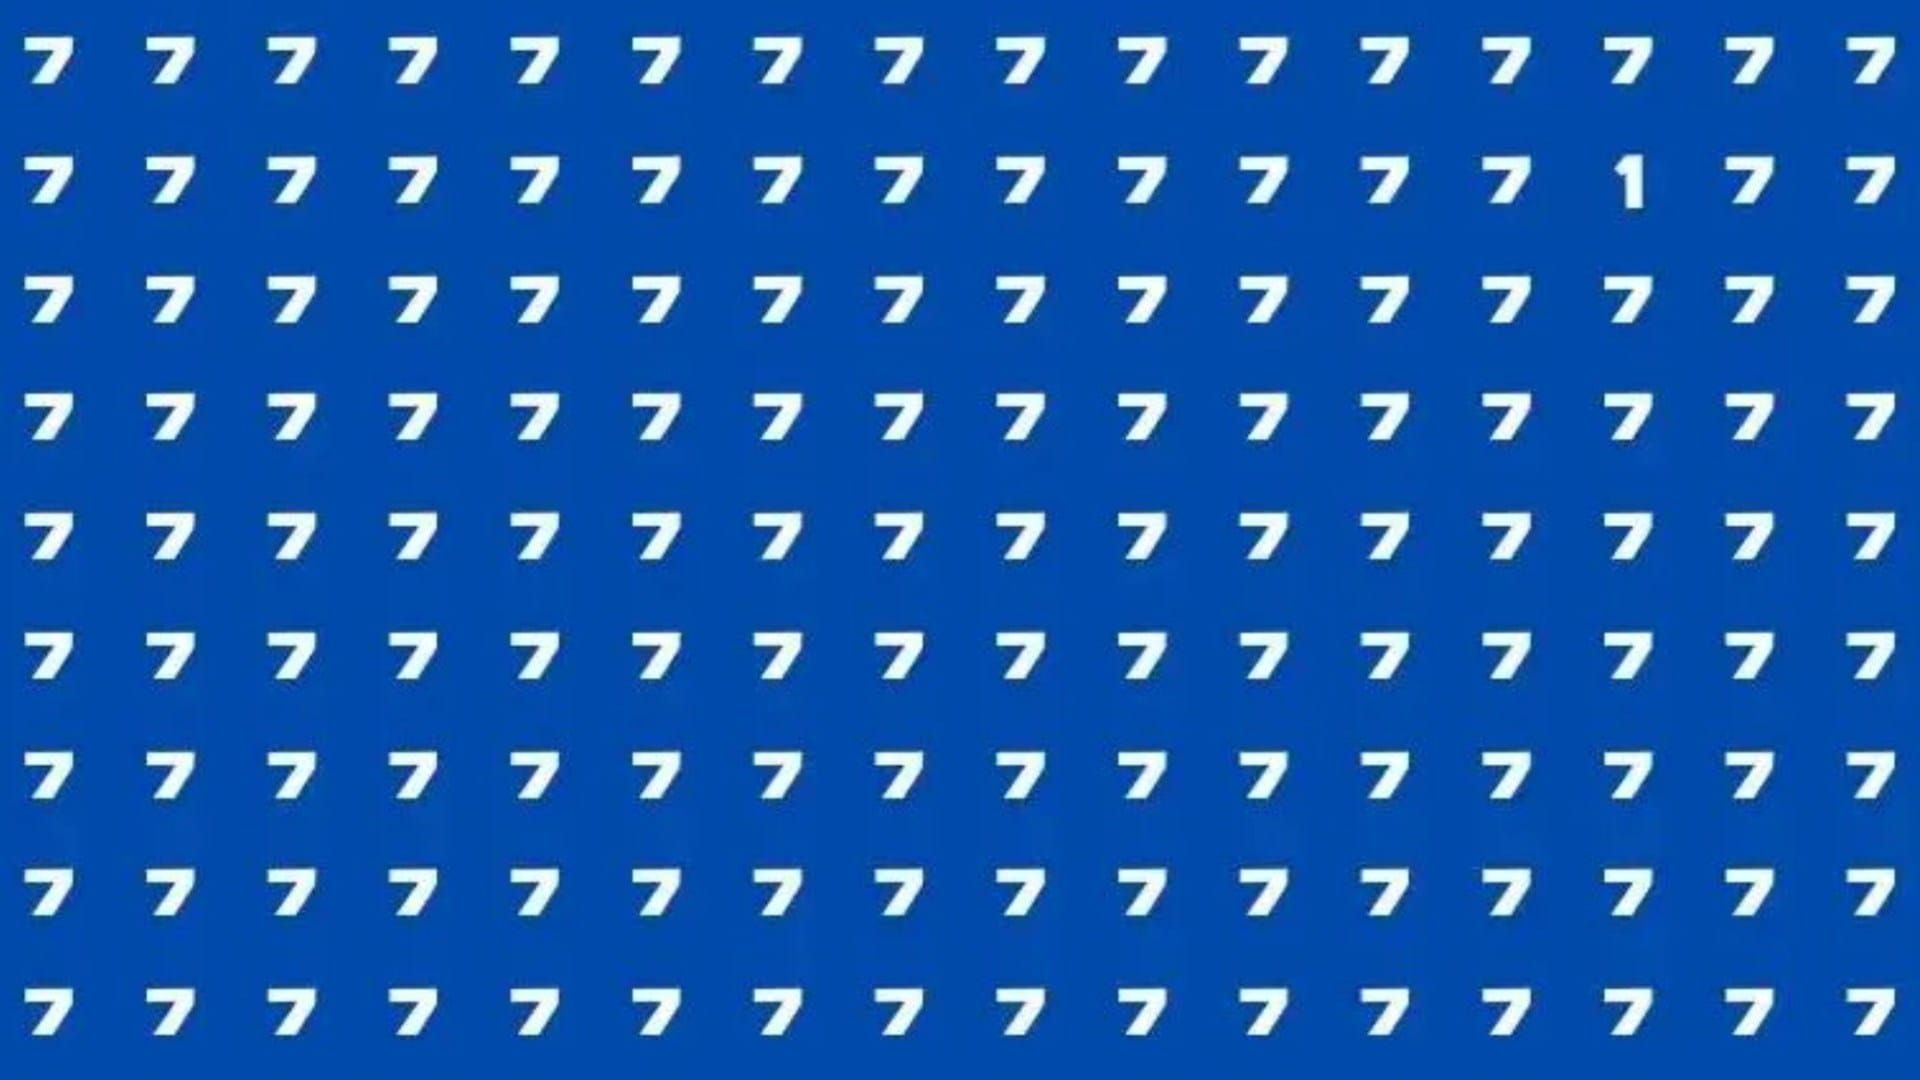 You have the eyes of a hawk if you can spot the 1 hidden among the 7s in just 10 seconds